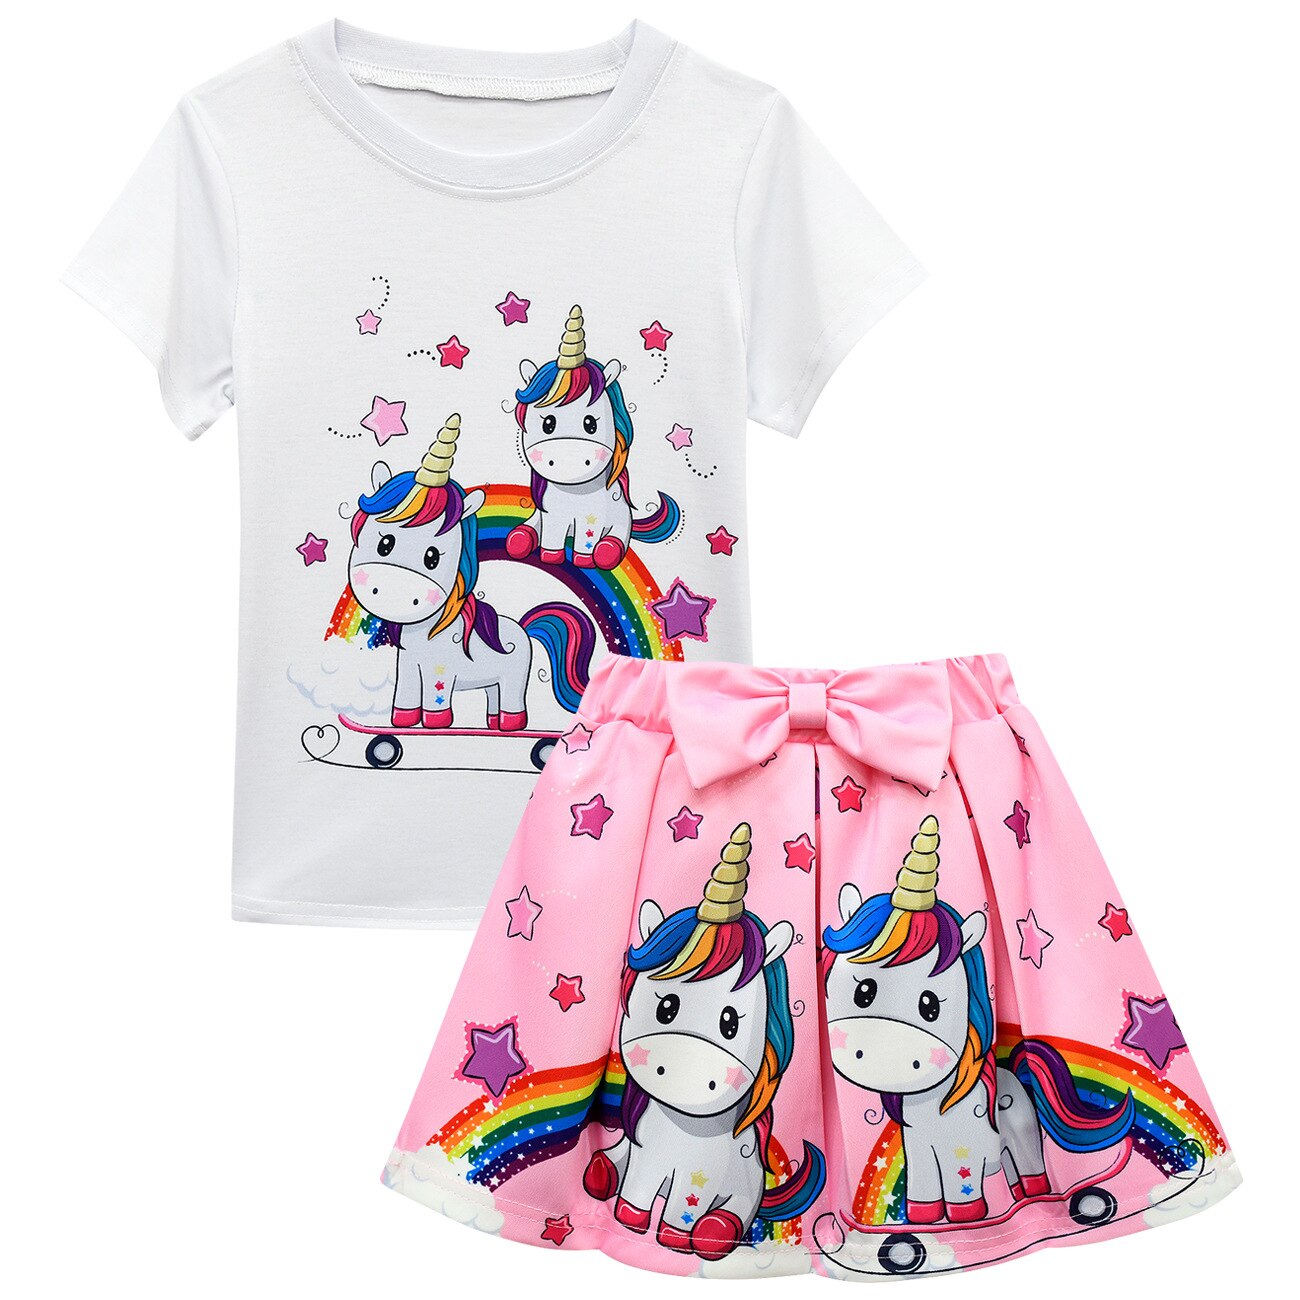 2 Pcs Spring/Summer Party Unicorn Clothing Set - Pink & Blue Baby Shop - Review